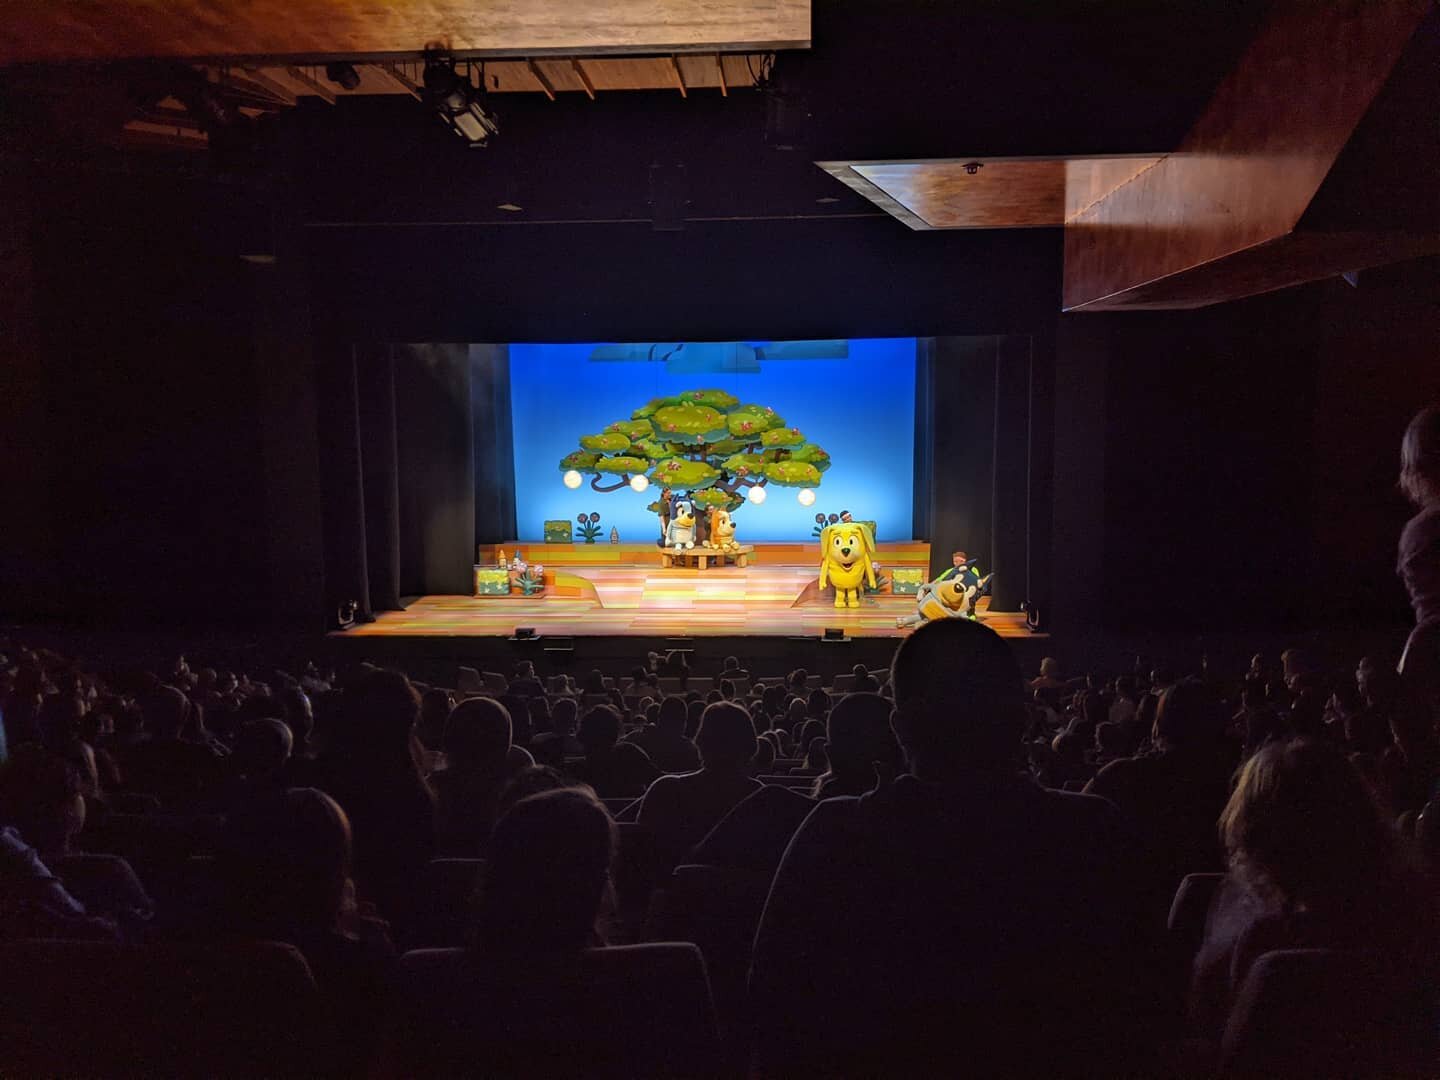 I finally got to see the show today! After a week of Puppet Doctor-ing (two if you count Townsville earlier this year), it was great to see everything in action. Such a gorgeous show with gorgeous puppets, props etc created by @ablanckcanvas . Very h